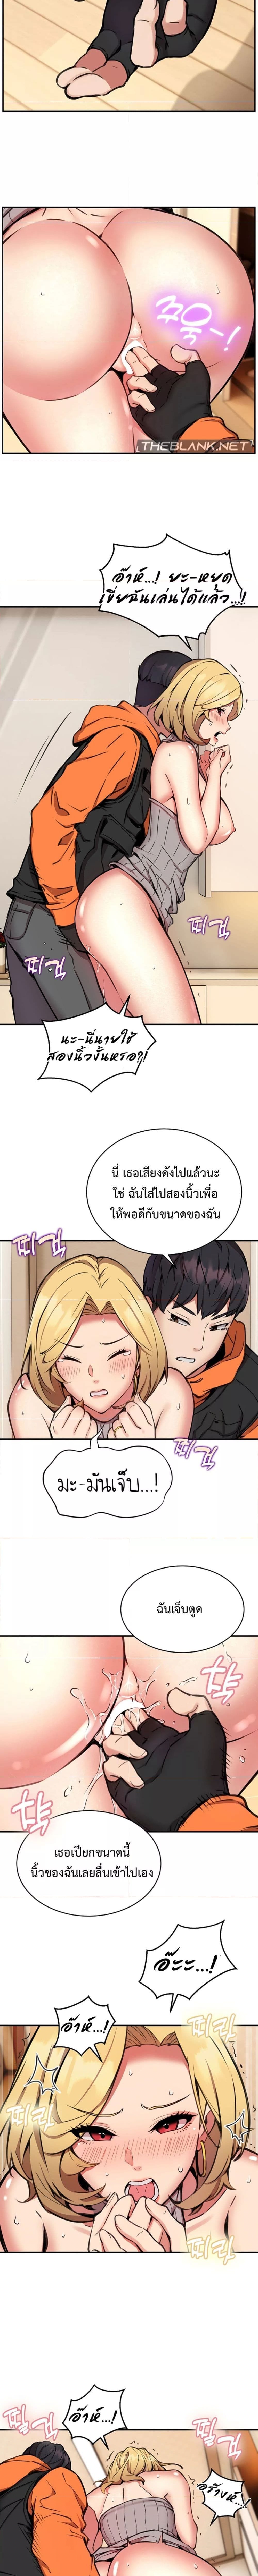 Driver in the New City ตอนที่ 9 ภาพ 6